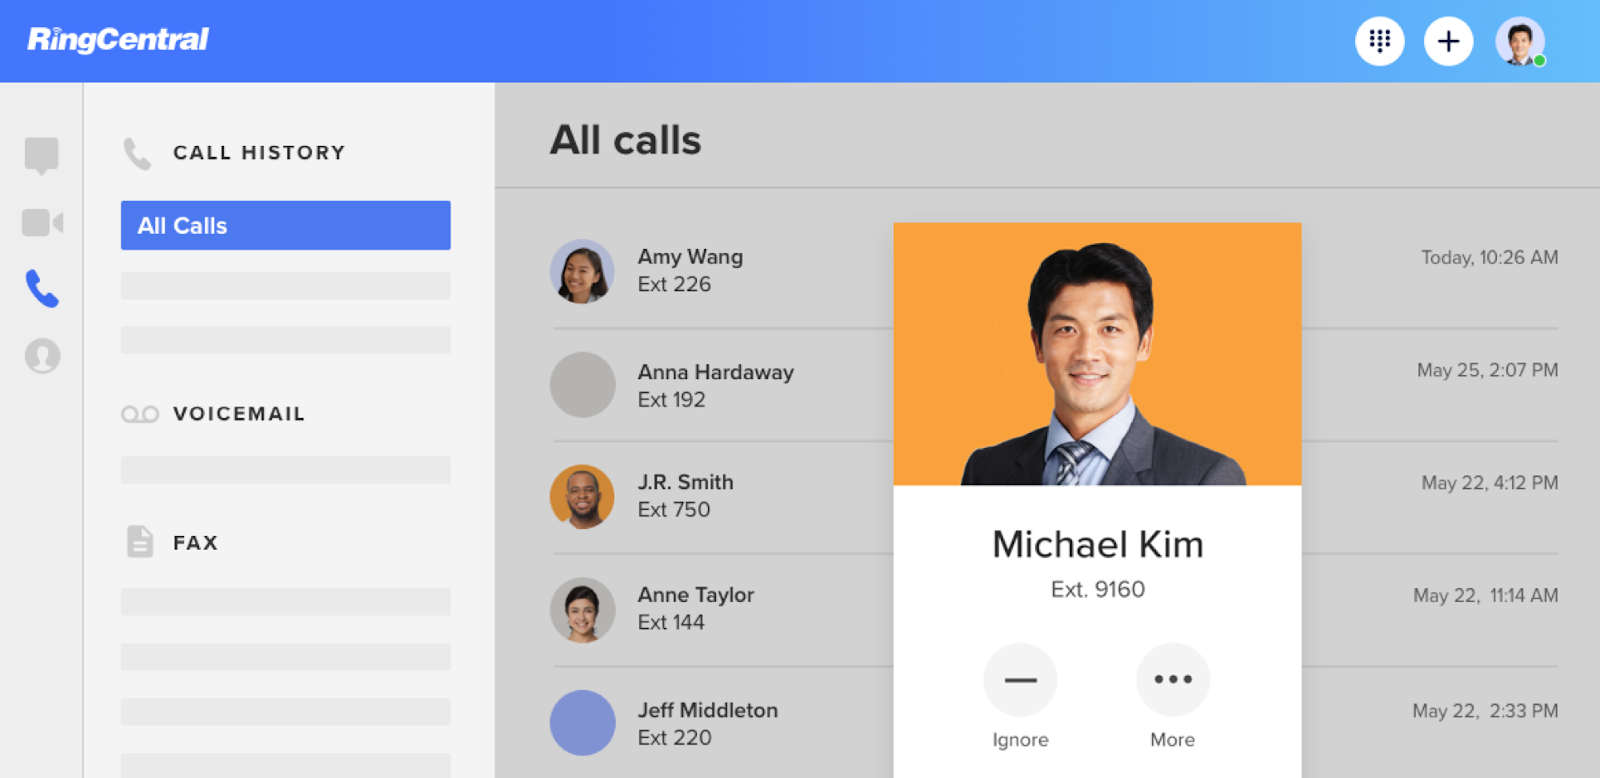 RIngcentral for simless phone number